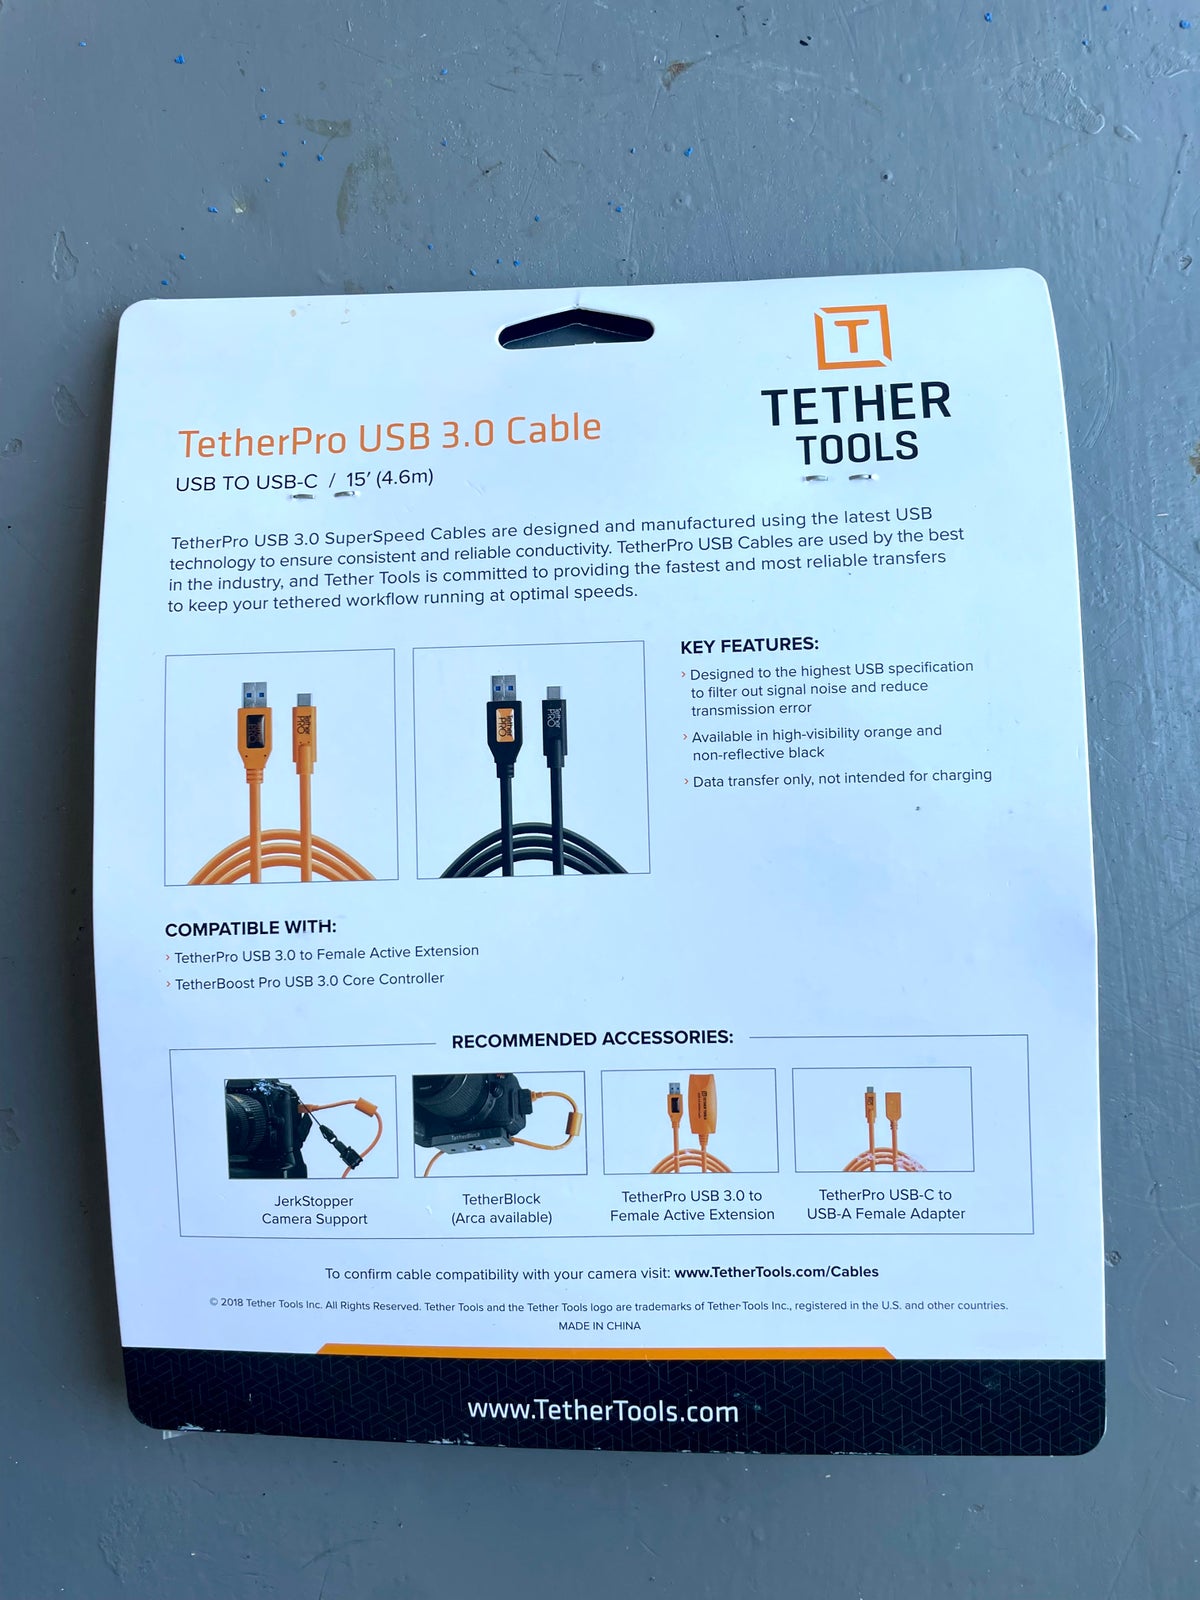 Tether Pro USB 3.0 cable, Tether, USB 3.0